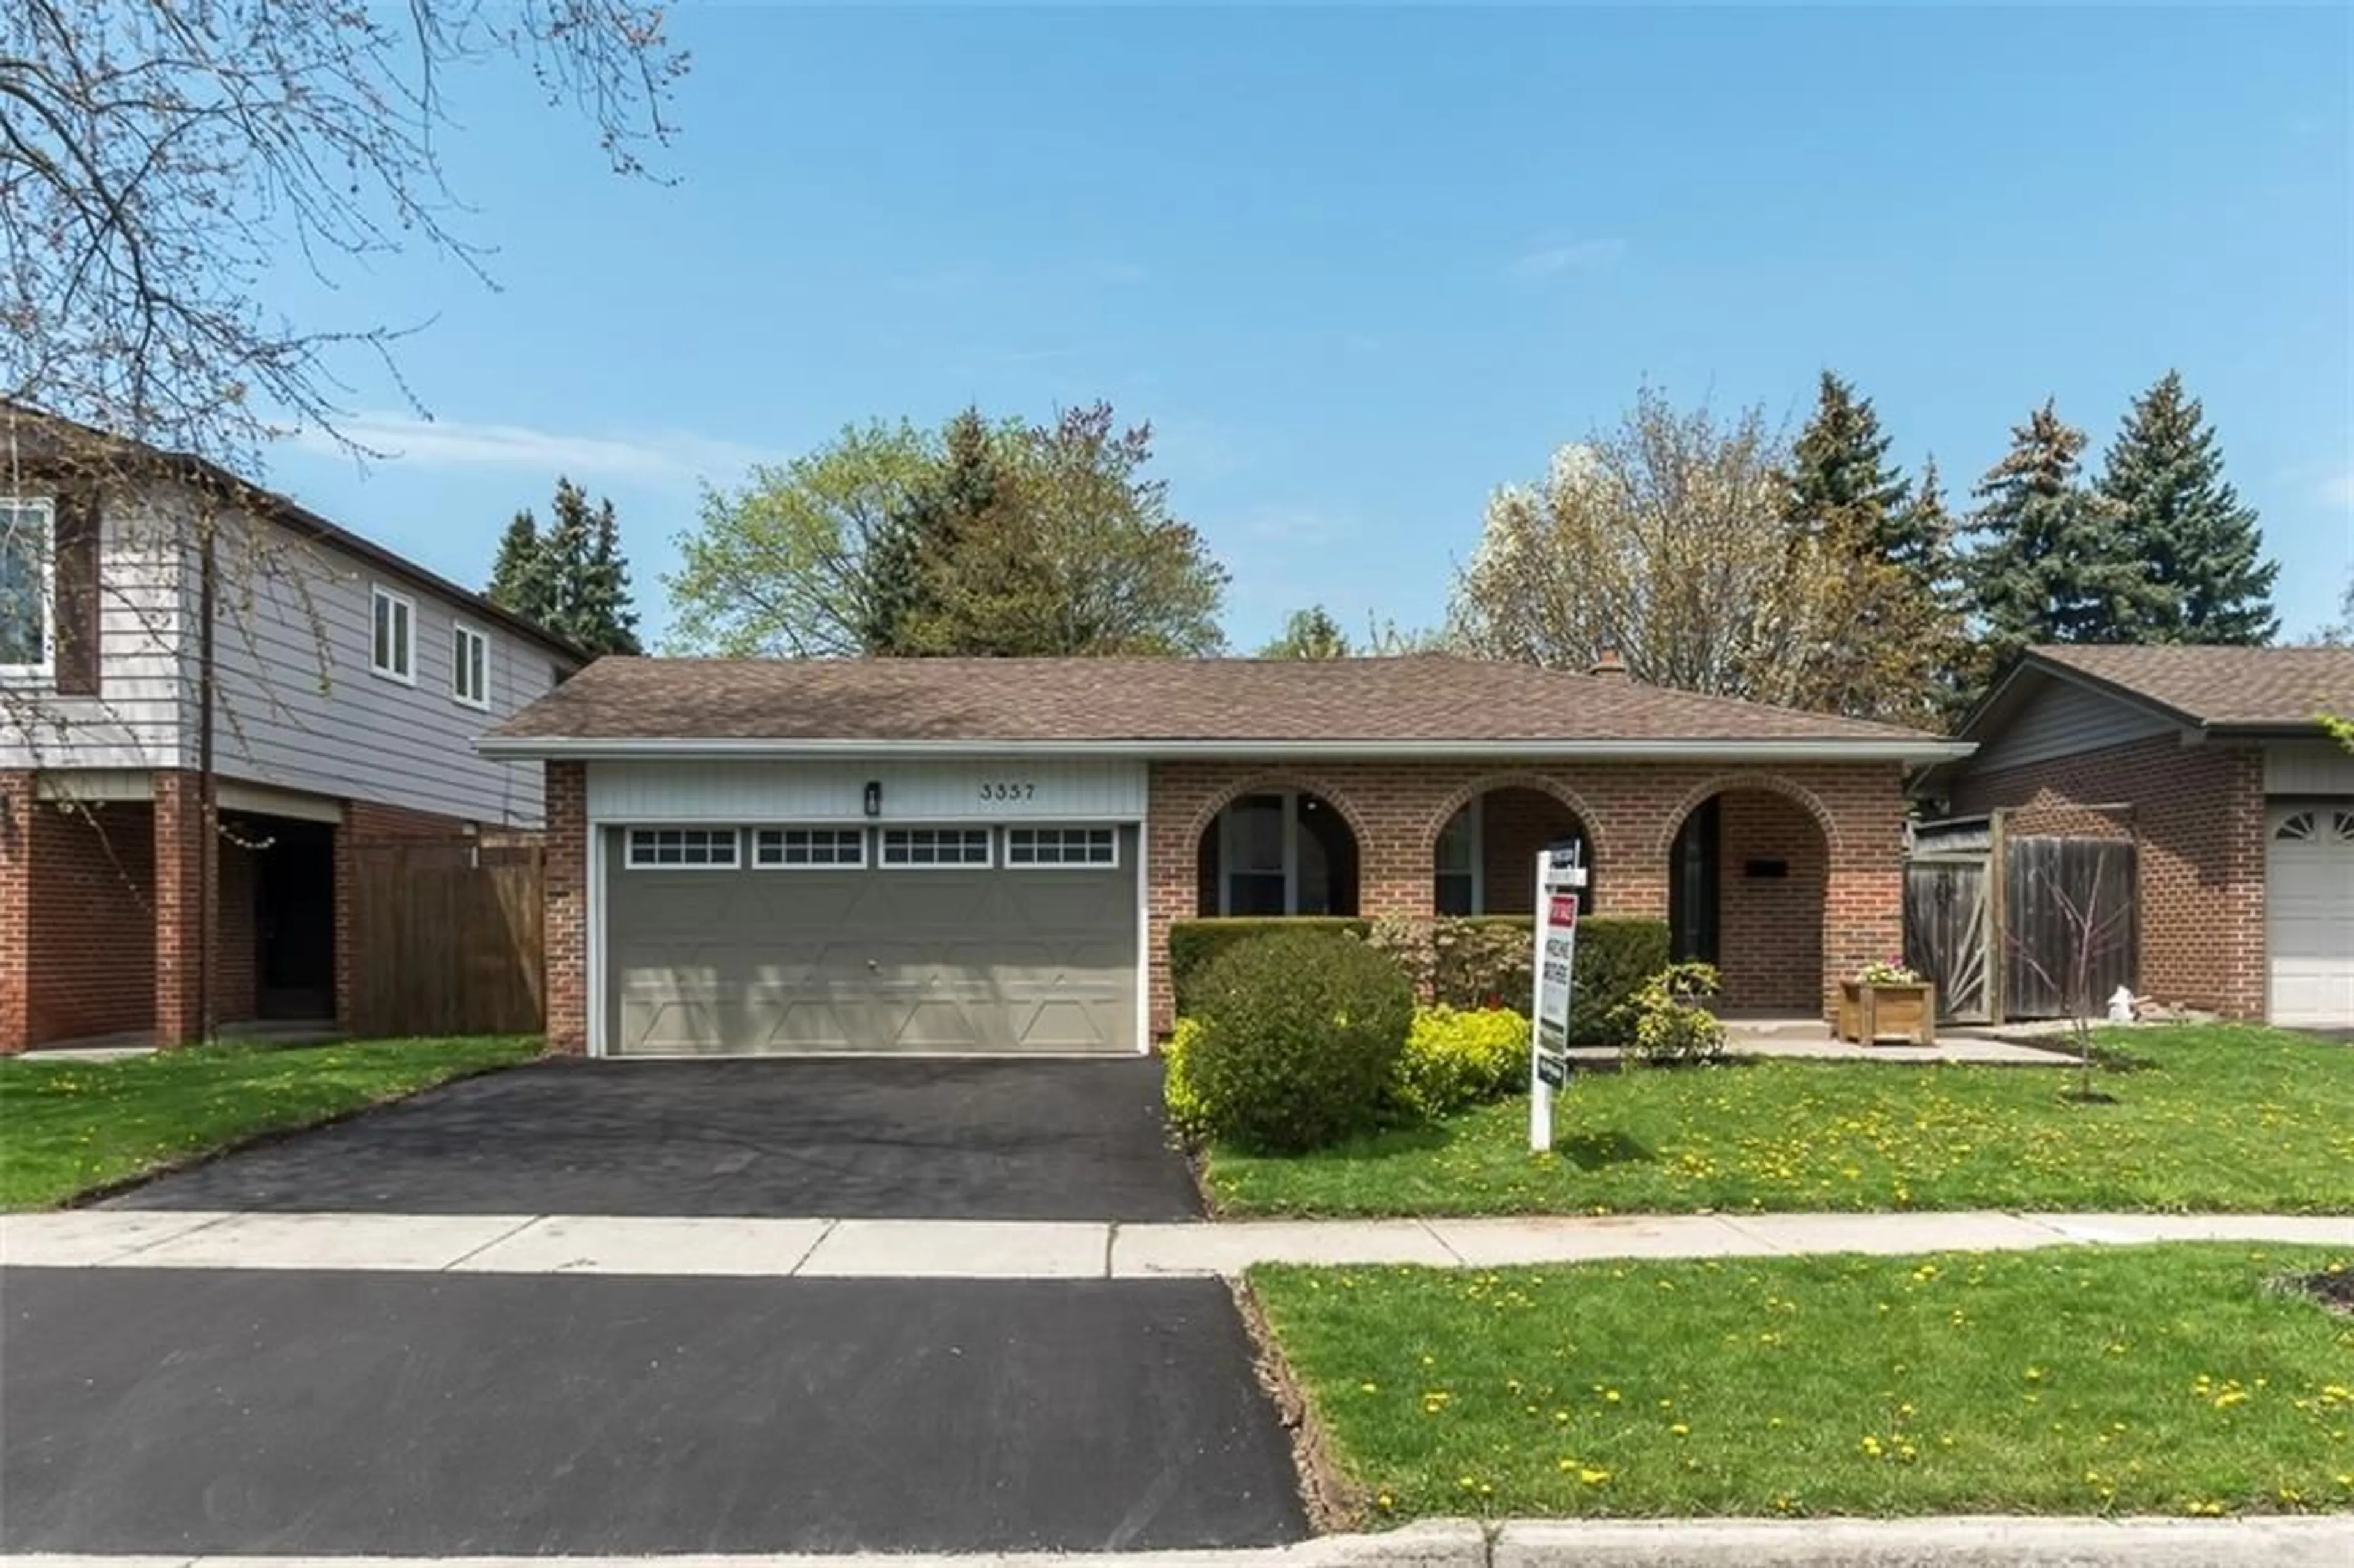 Home with brick exterior material for 3357 HANNIBAL Rd, Burlington Ontario L7M 1R8